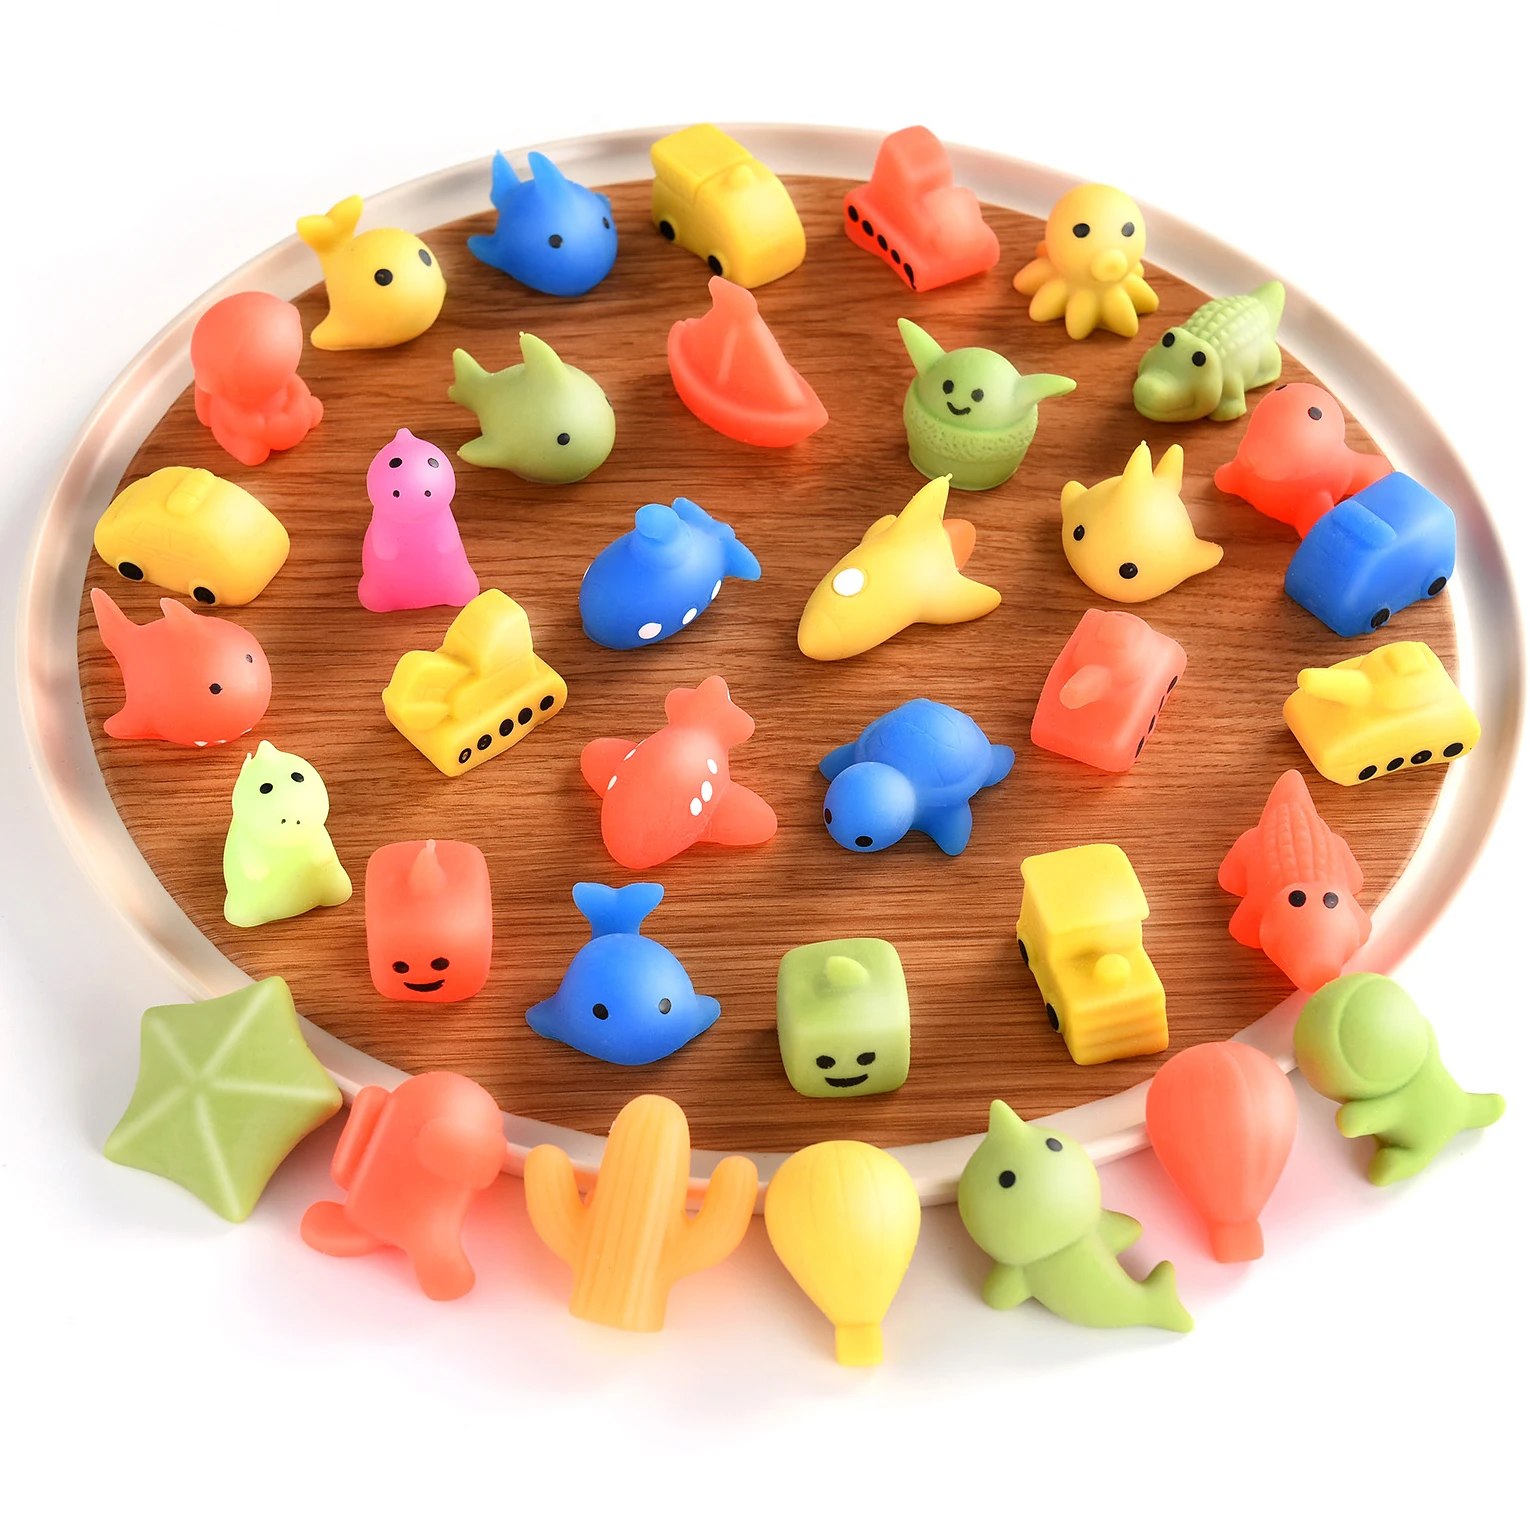 30pcs/Batch Cartoon Animation Marine Life Transport Tool Mixed With Children'S Decompression Toy Gift Batch Send Storage Bag enlarge